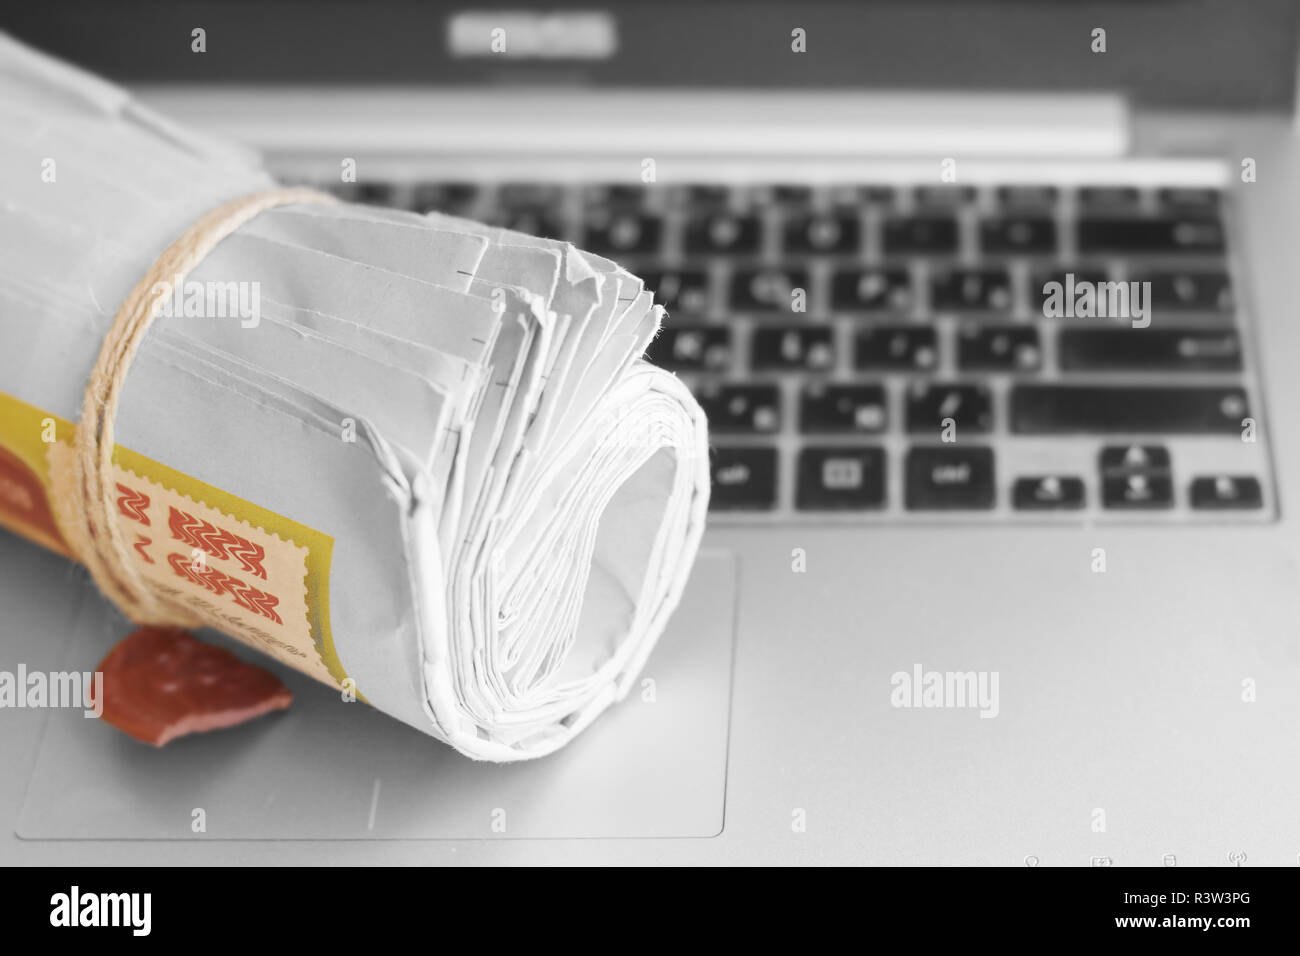 Newspapers and computer. Folded and rolled papers and magazines on keyboard of open laptop. Concept for news by different sources of information Stock Photo